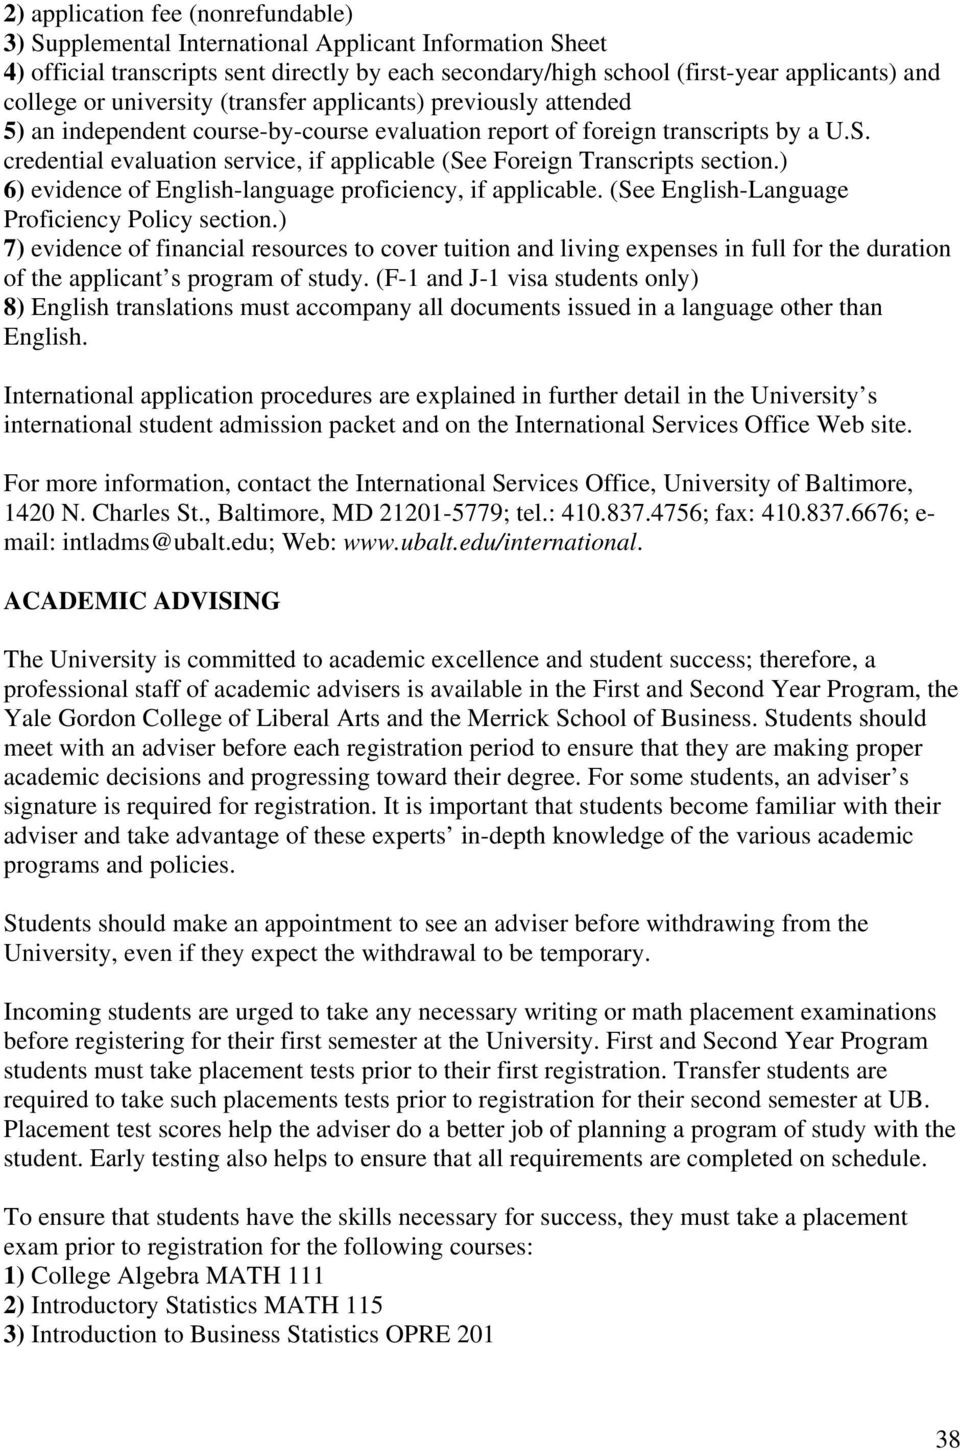 credential evaluation service, if applicable (See Foreign Transcripts section.) 6) evidence of English-language proficiency, if applicable. (See English-Language Proficiency Policy section.